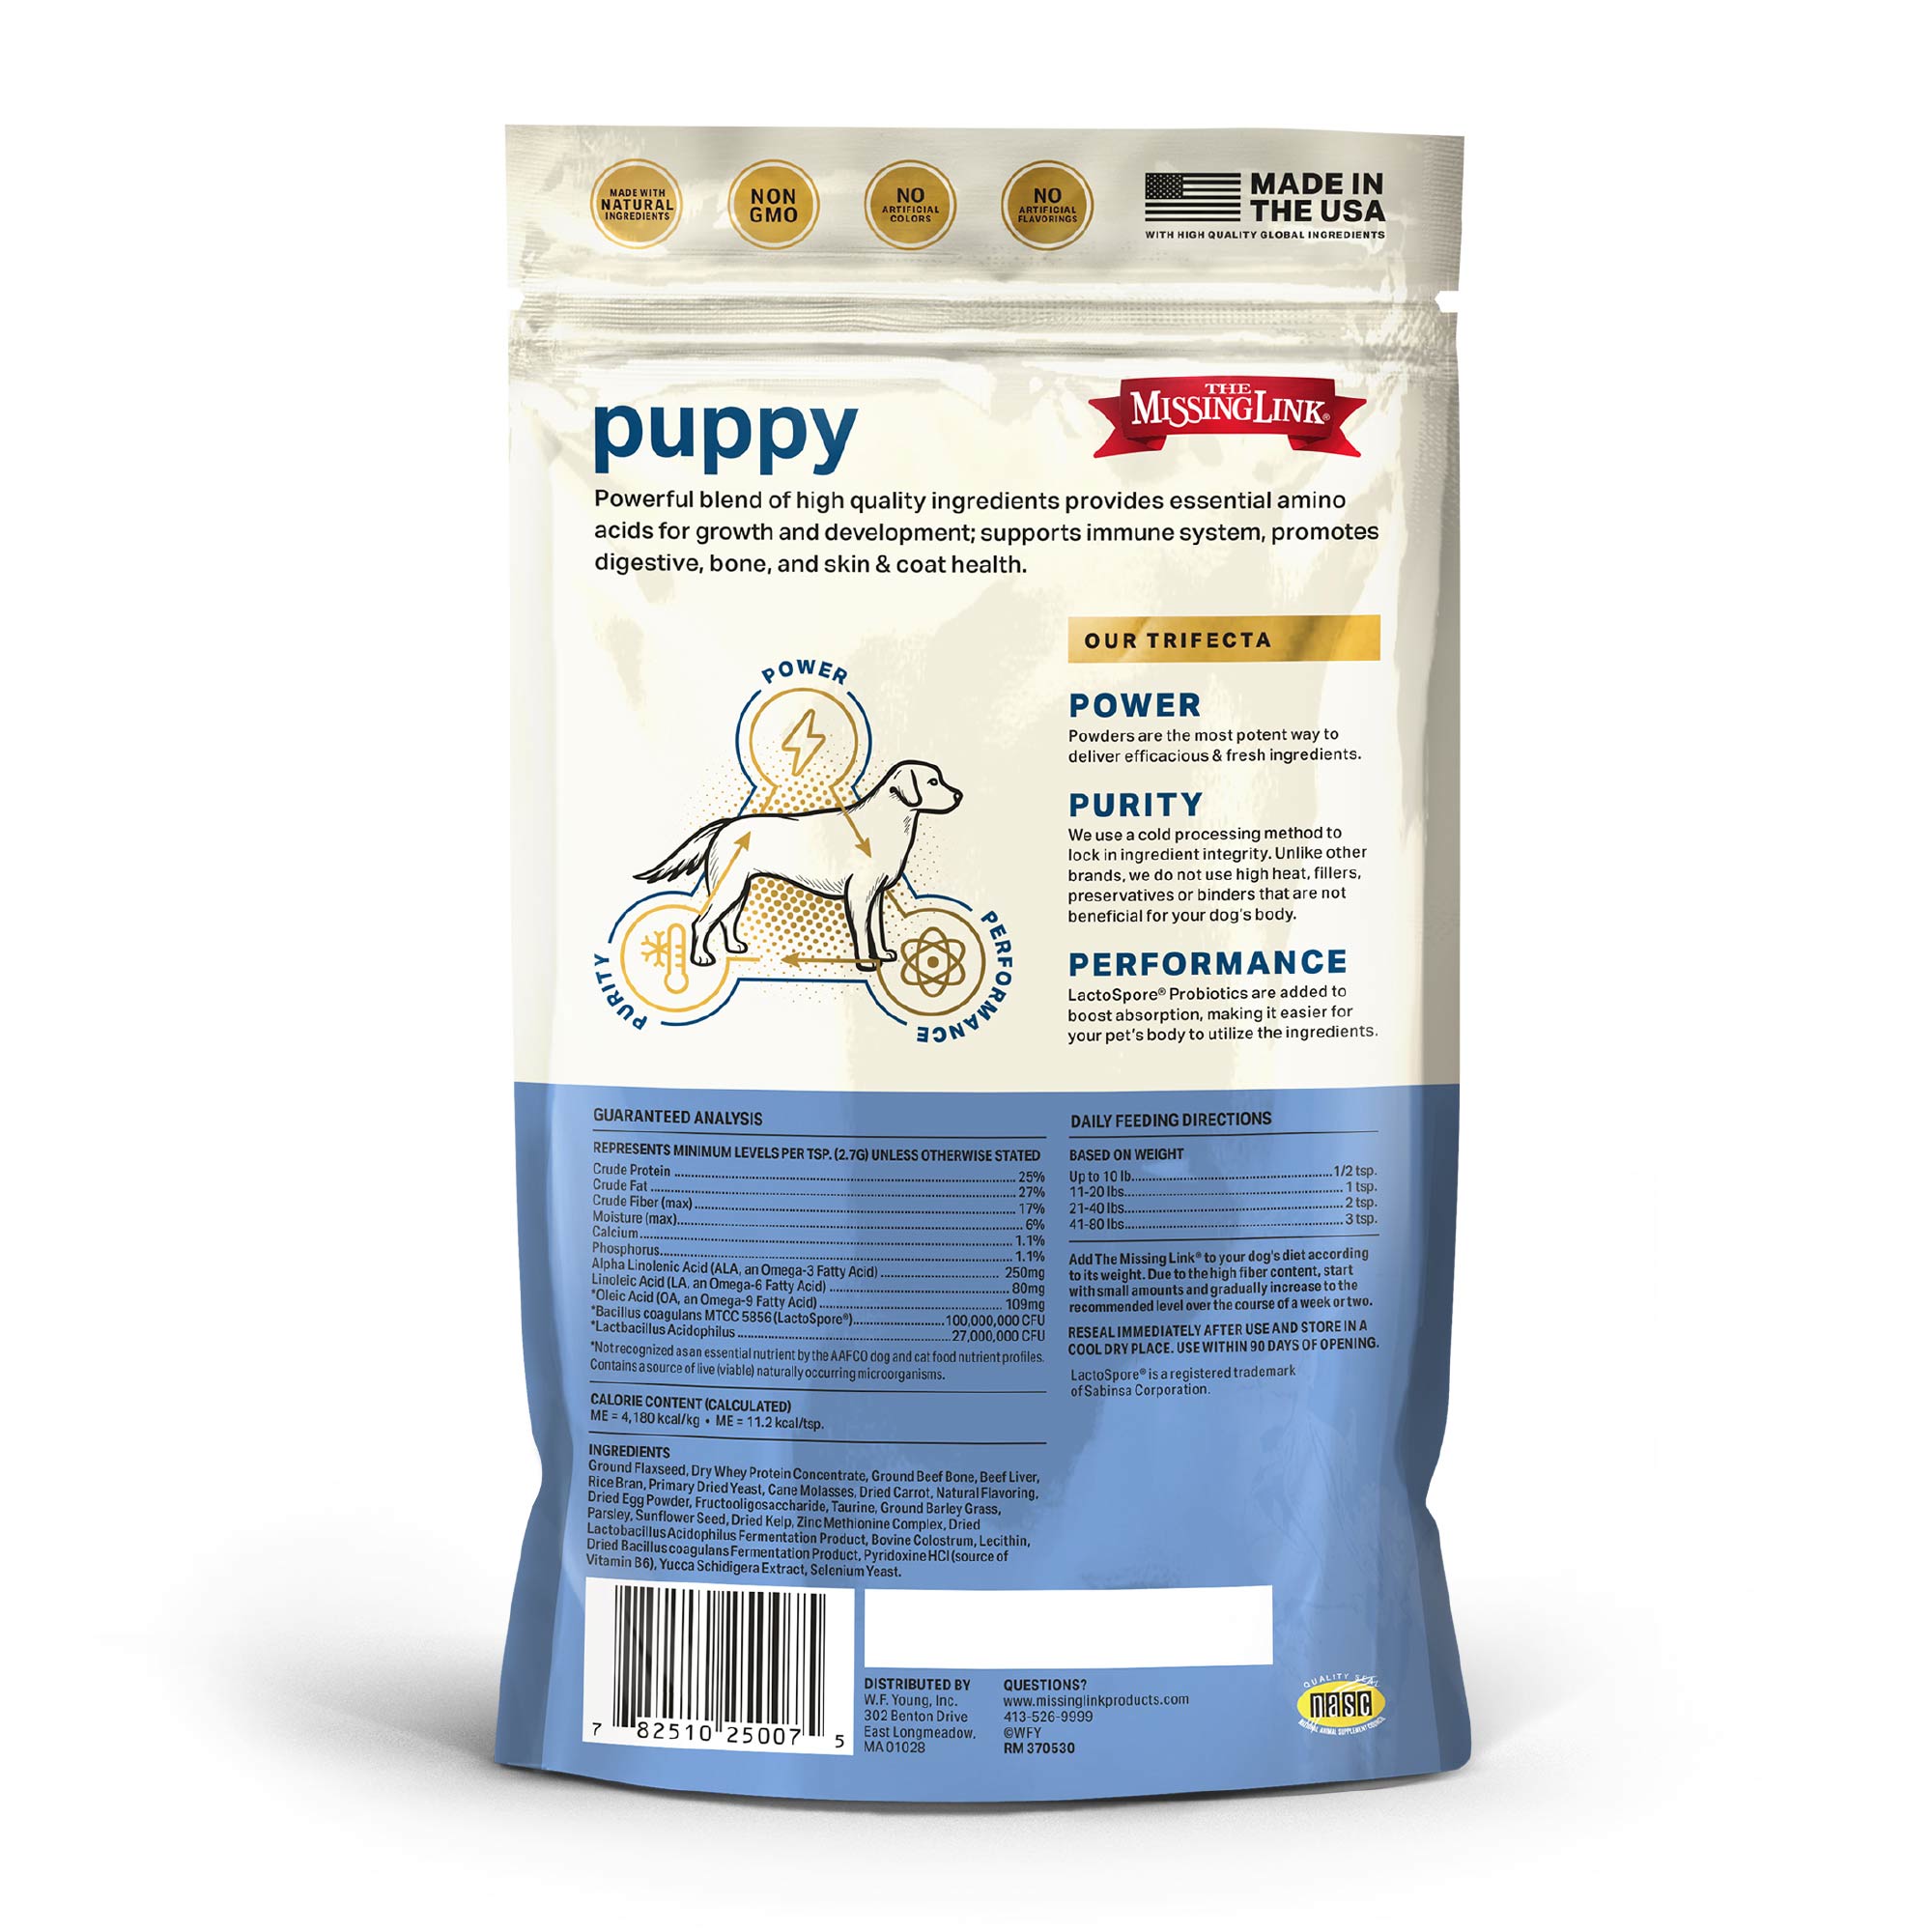 The Missing Link® Puppy Health Supplement for Dogs 8 oz. Powder